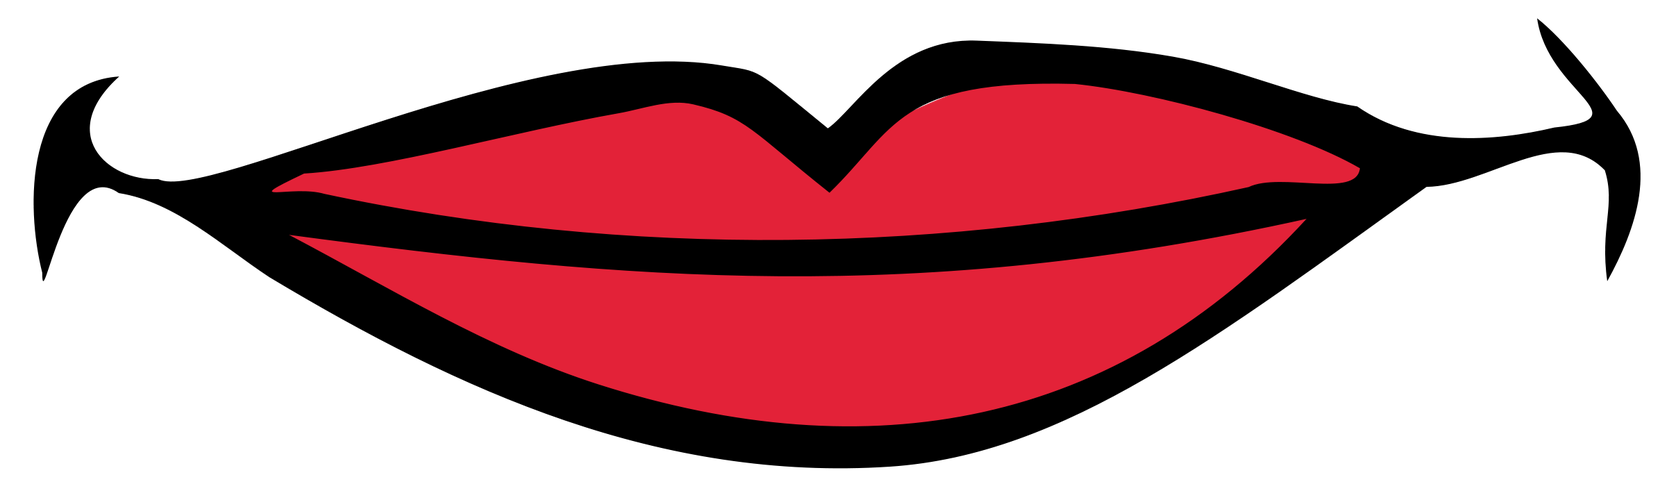 smile lips png images